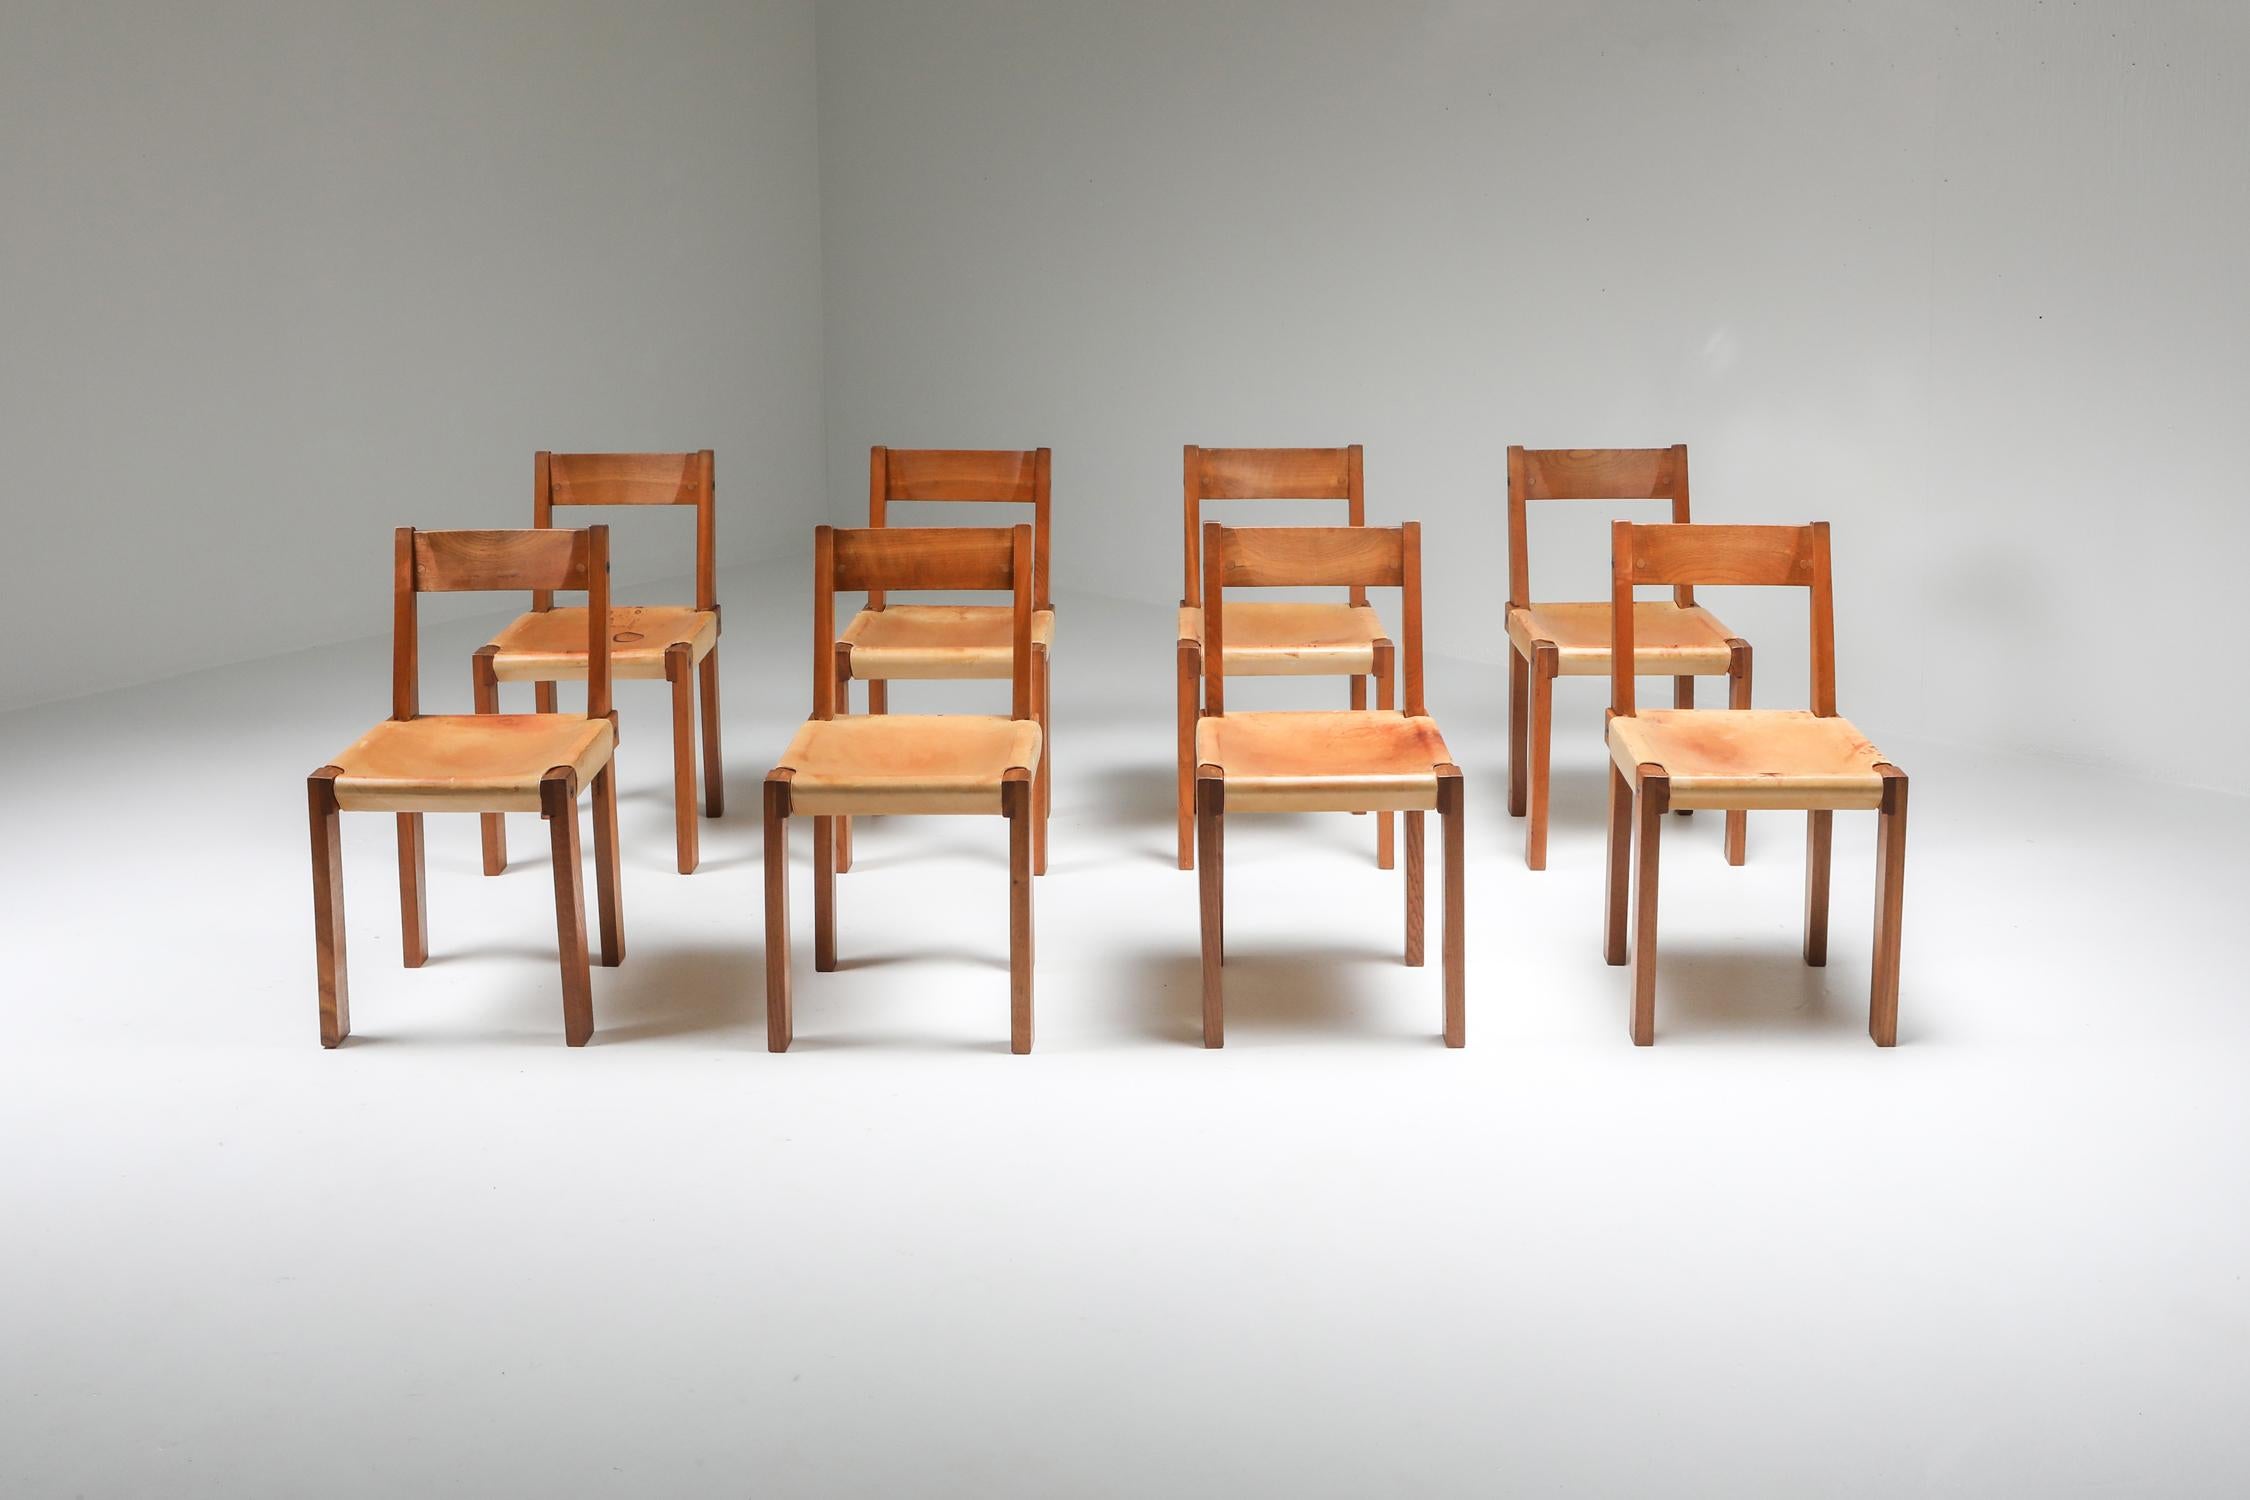 Pierre Chapo, 7 available dining chairs, model S24, elm and natural leather, France, circa 1966

Dining chairs in solid elmwood with saddle leather seating and back. Designed by French designer Pierre Chapo in Paris. These chairs have a cubic design